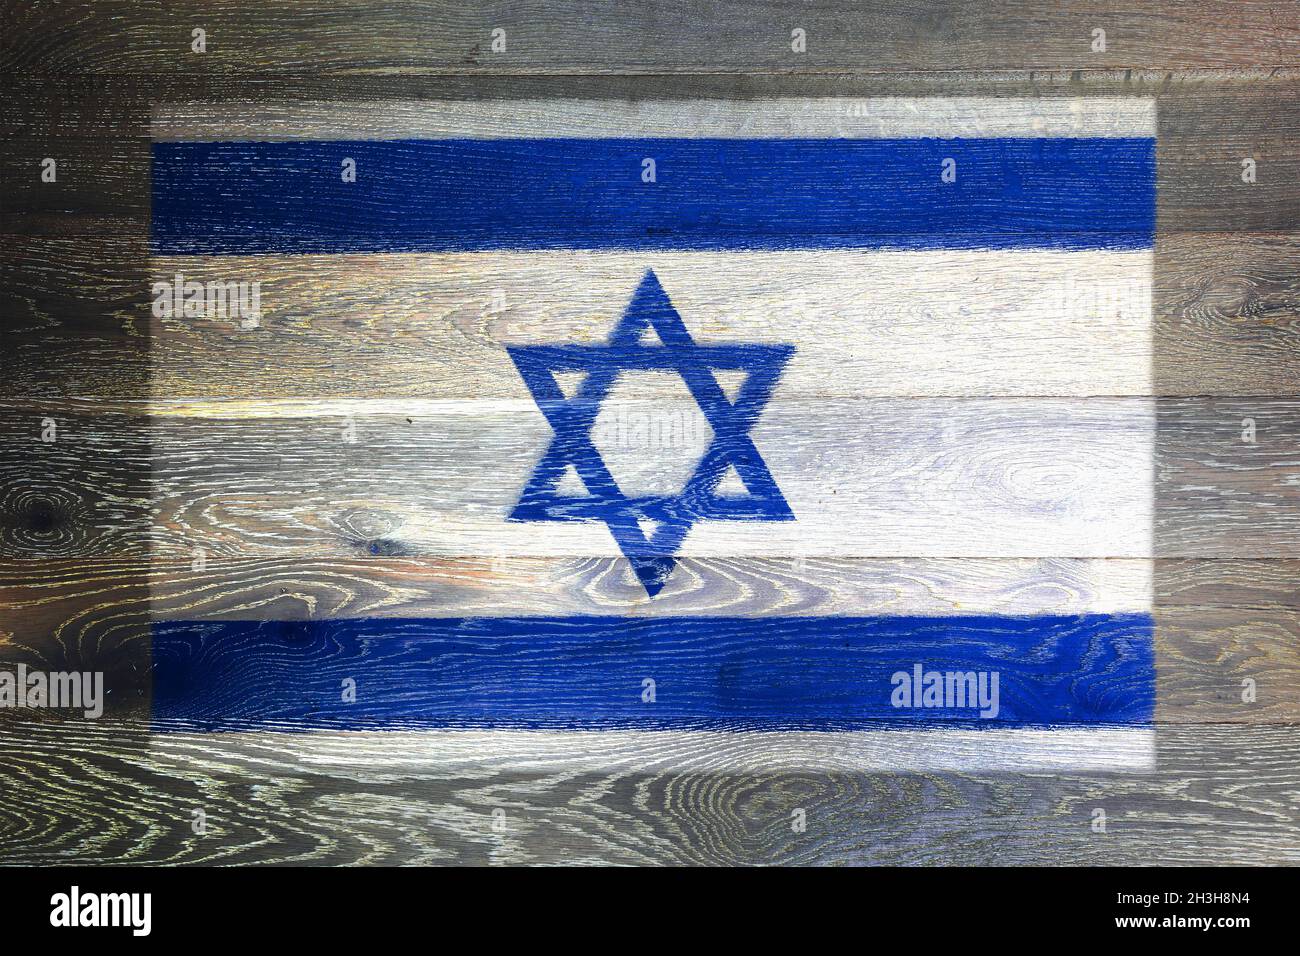 Israel flag on rustic old wood surface background Stock Photo